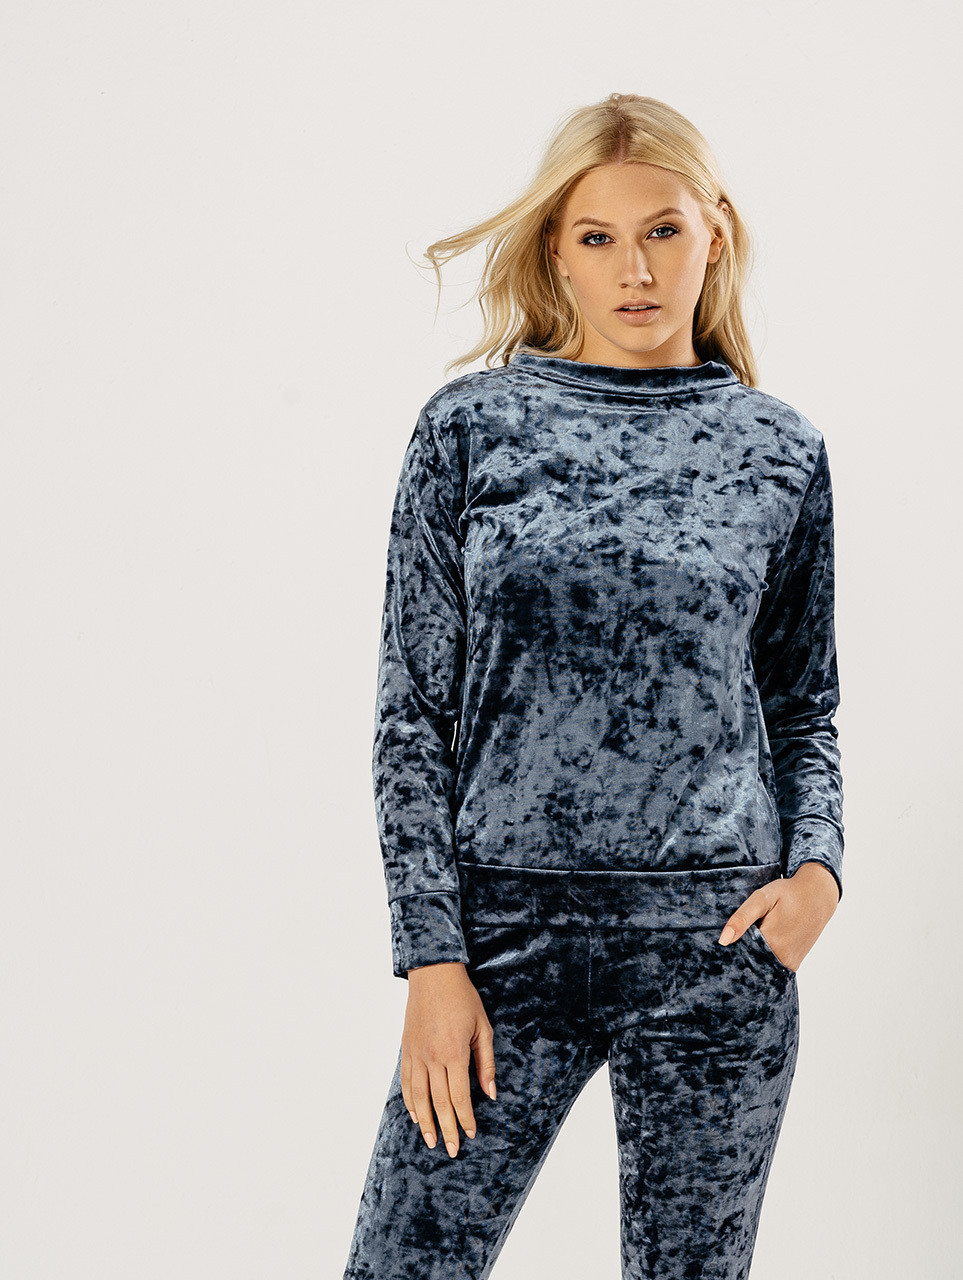 Get Cosy in This Season’s Loungewear